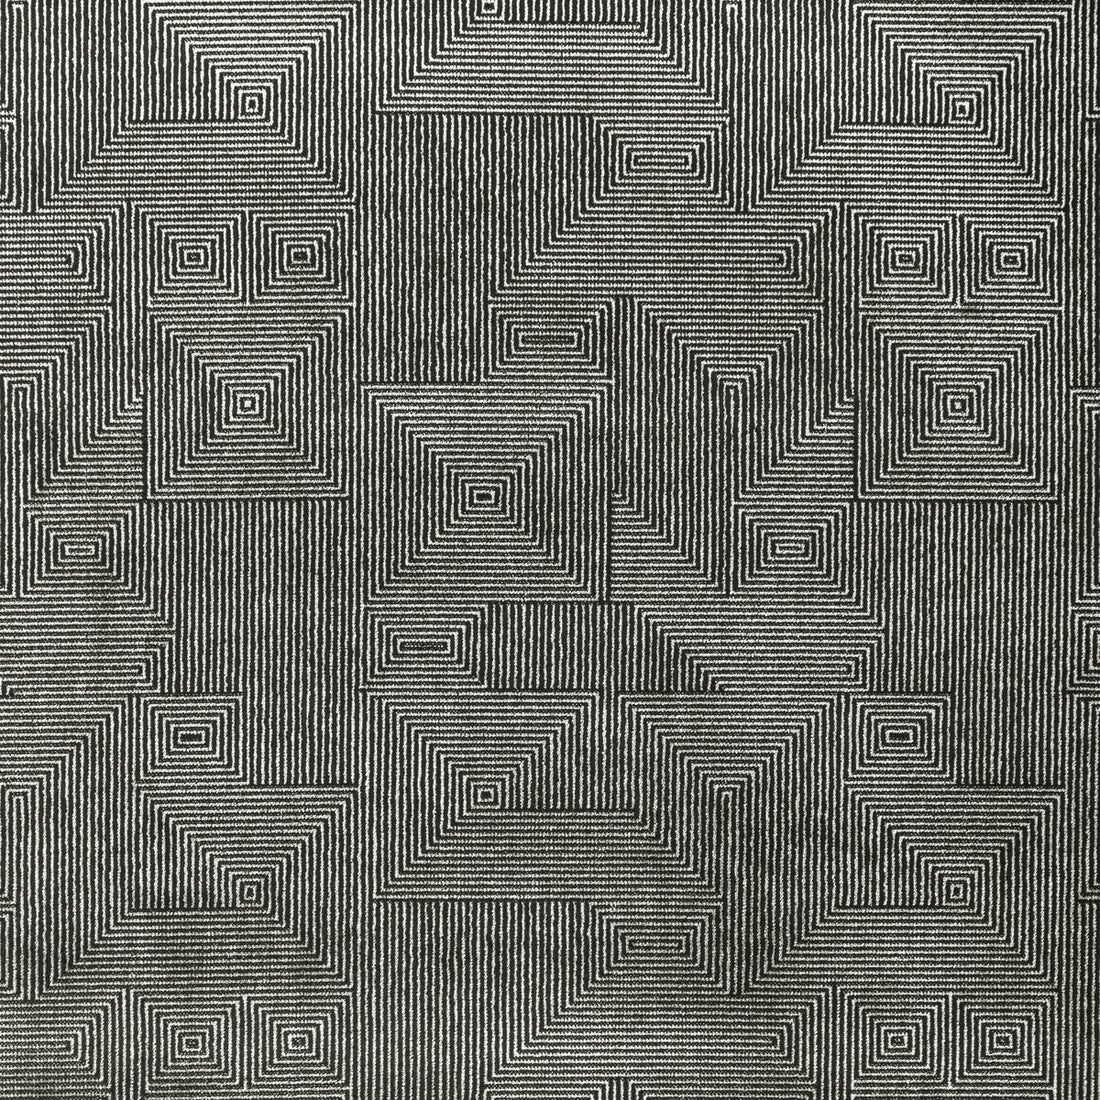 New Order fabric in zinc color - pattern 36043.21.0 - by Kravet Contract